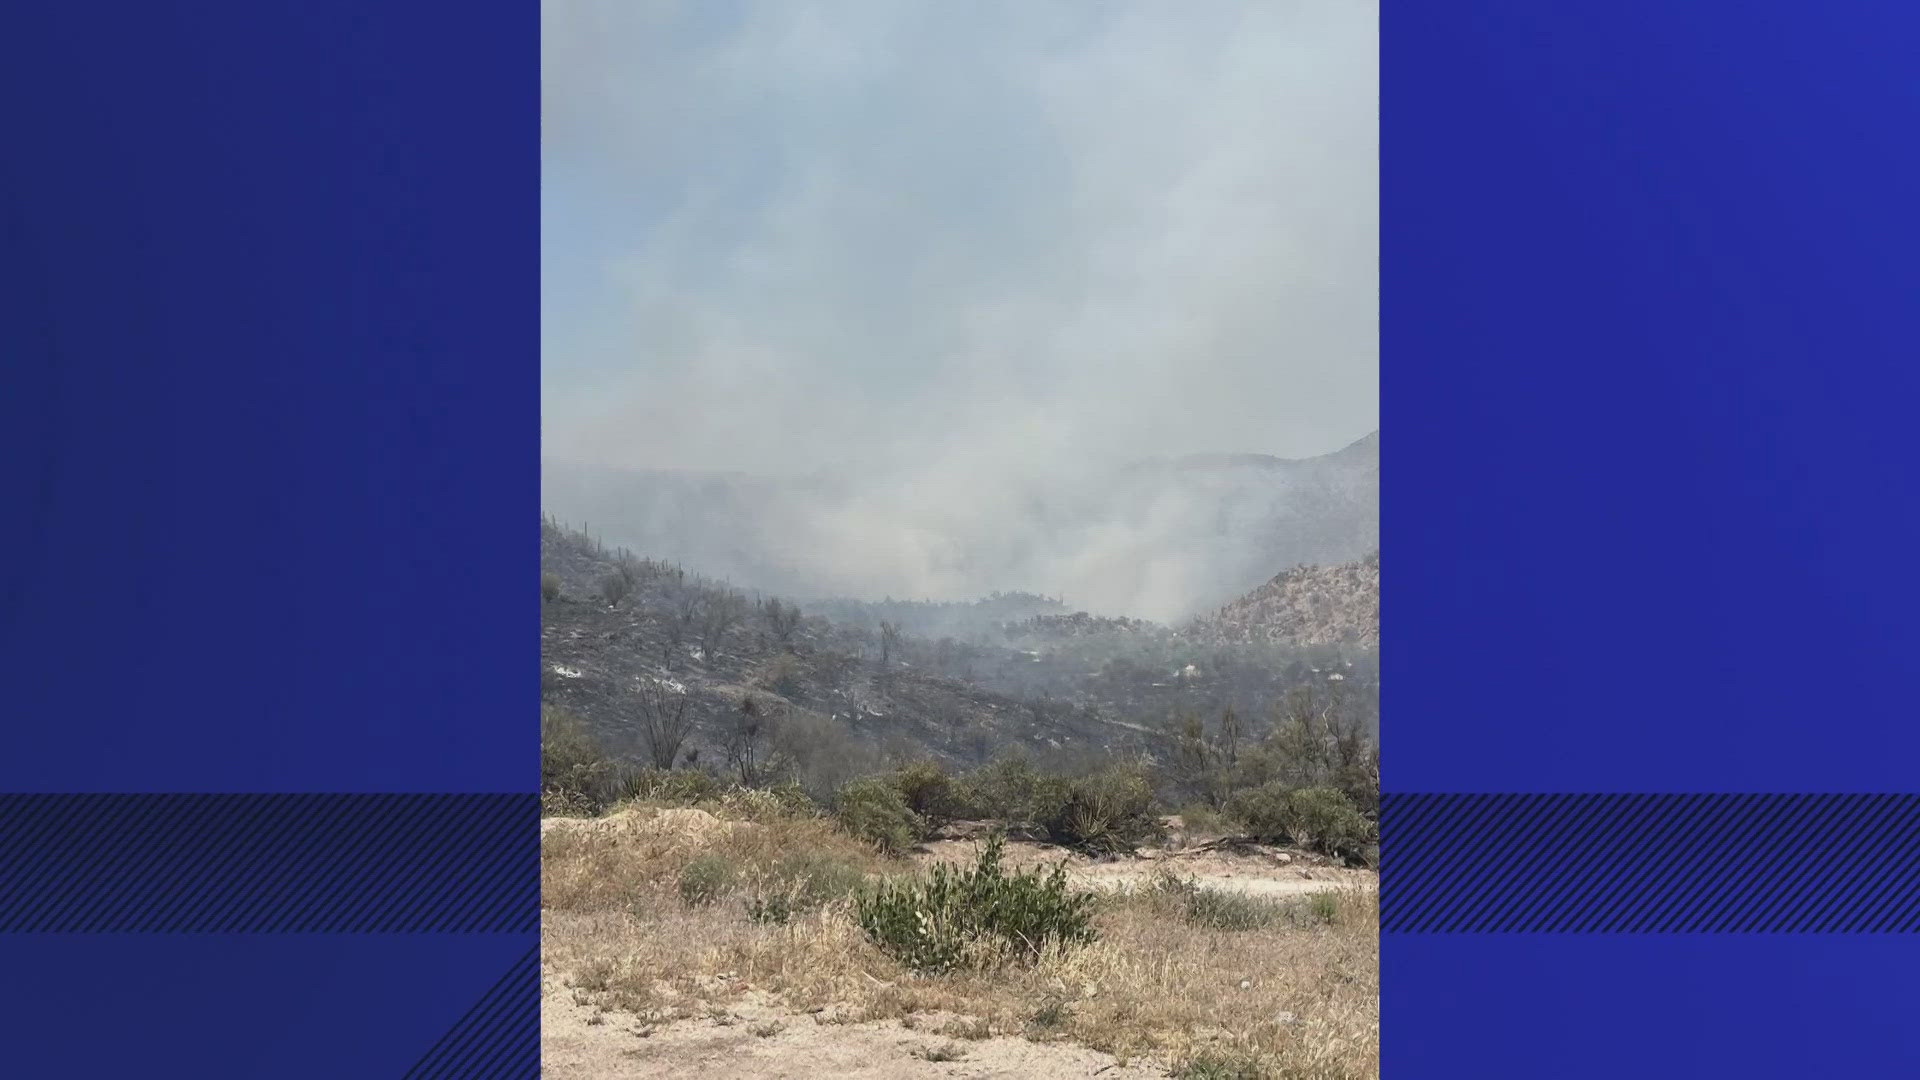 The Sugar Fire has burned at least 240 acres in the Tonto National Forest and is 30% contained. Watch the video for the latest details.